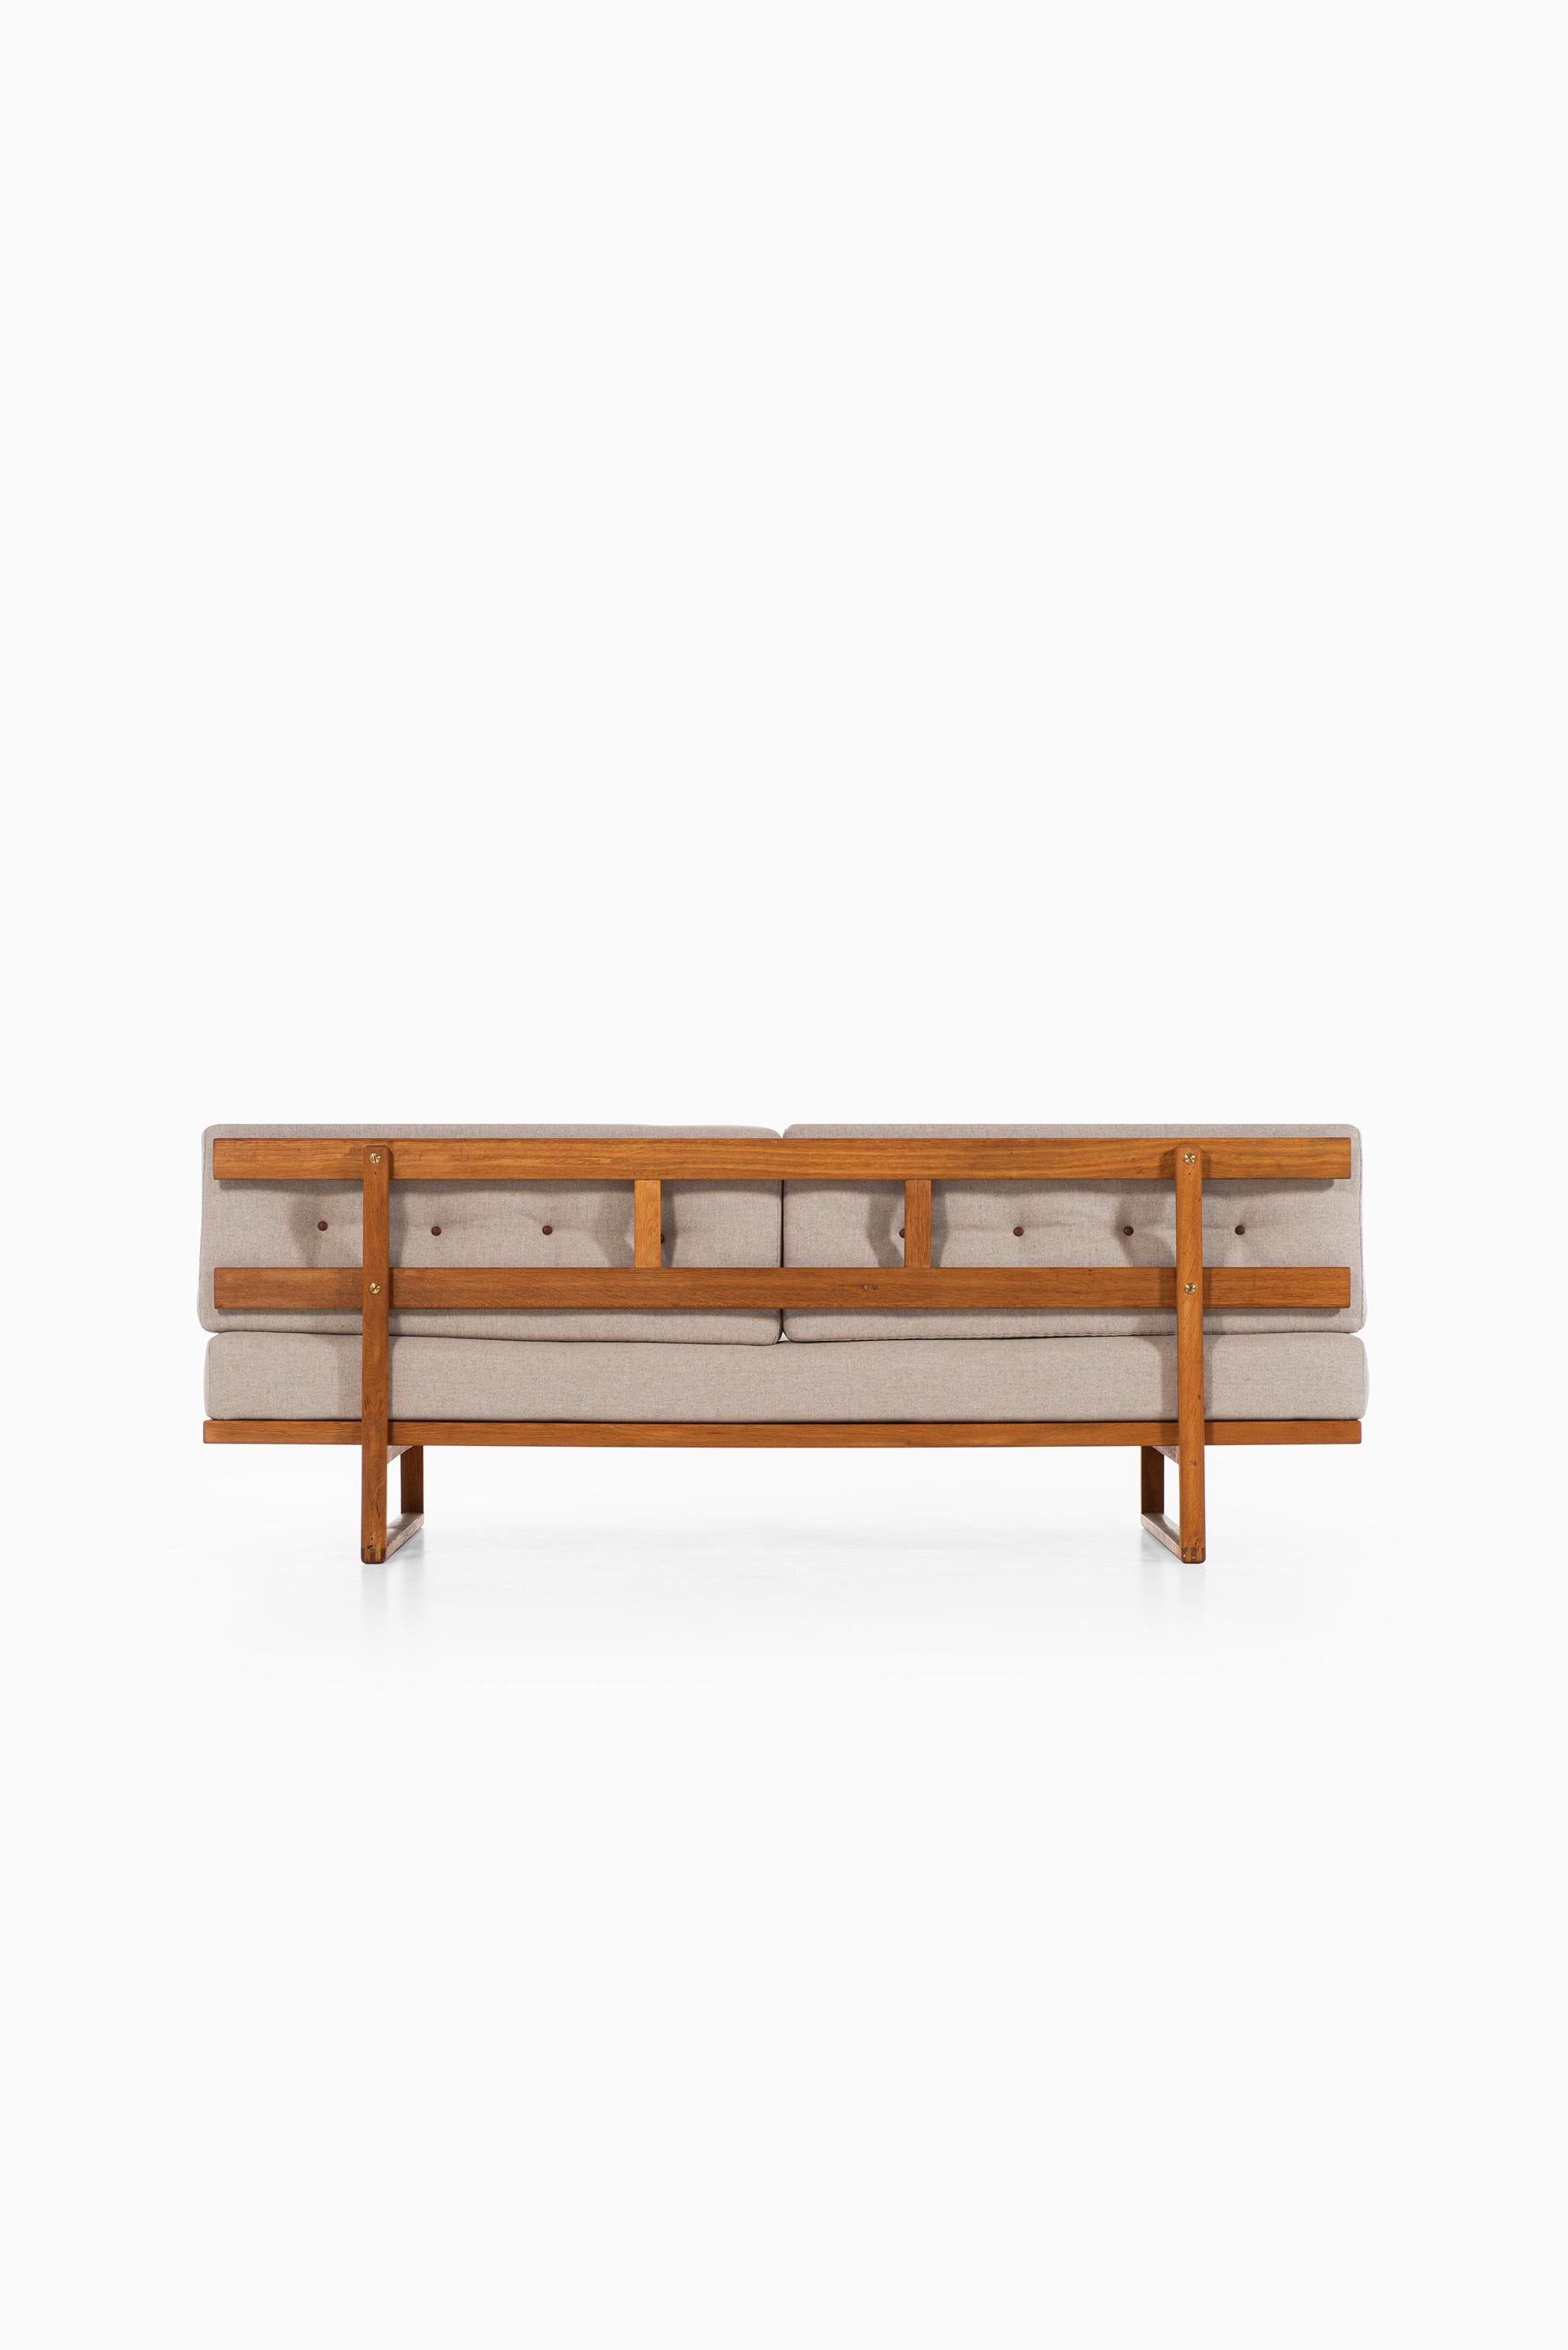 Mid-20th Century Børge Mogensen Sofa Model 4311/4312 Produced by Fredericia in Denmark